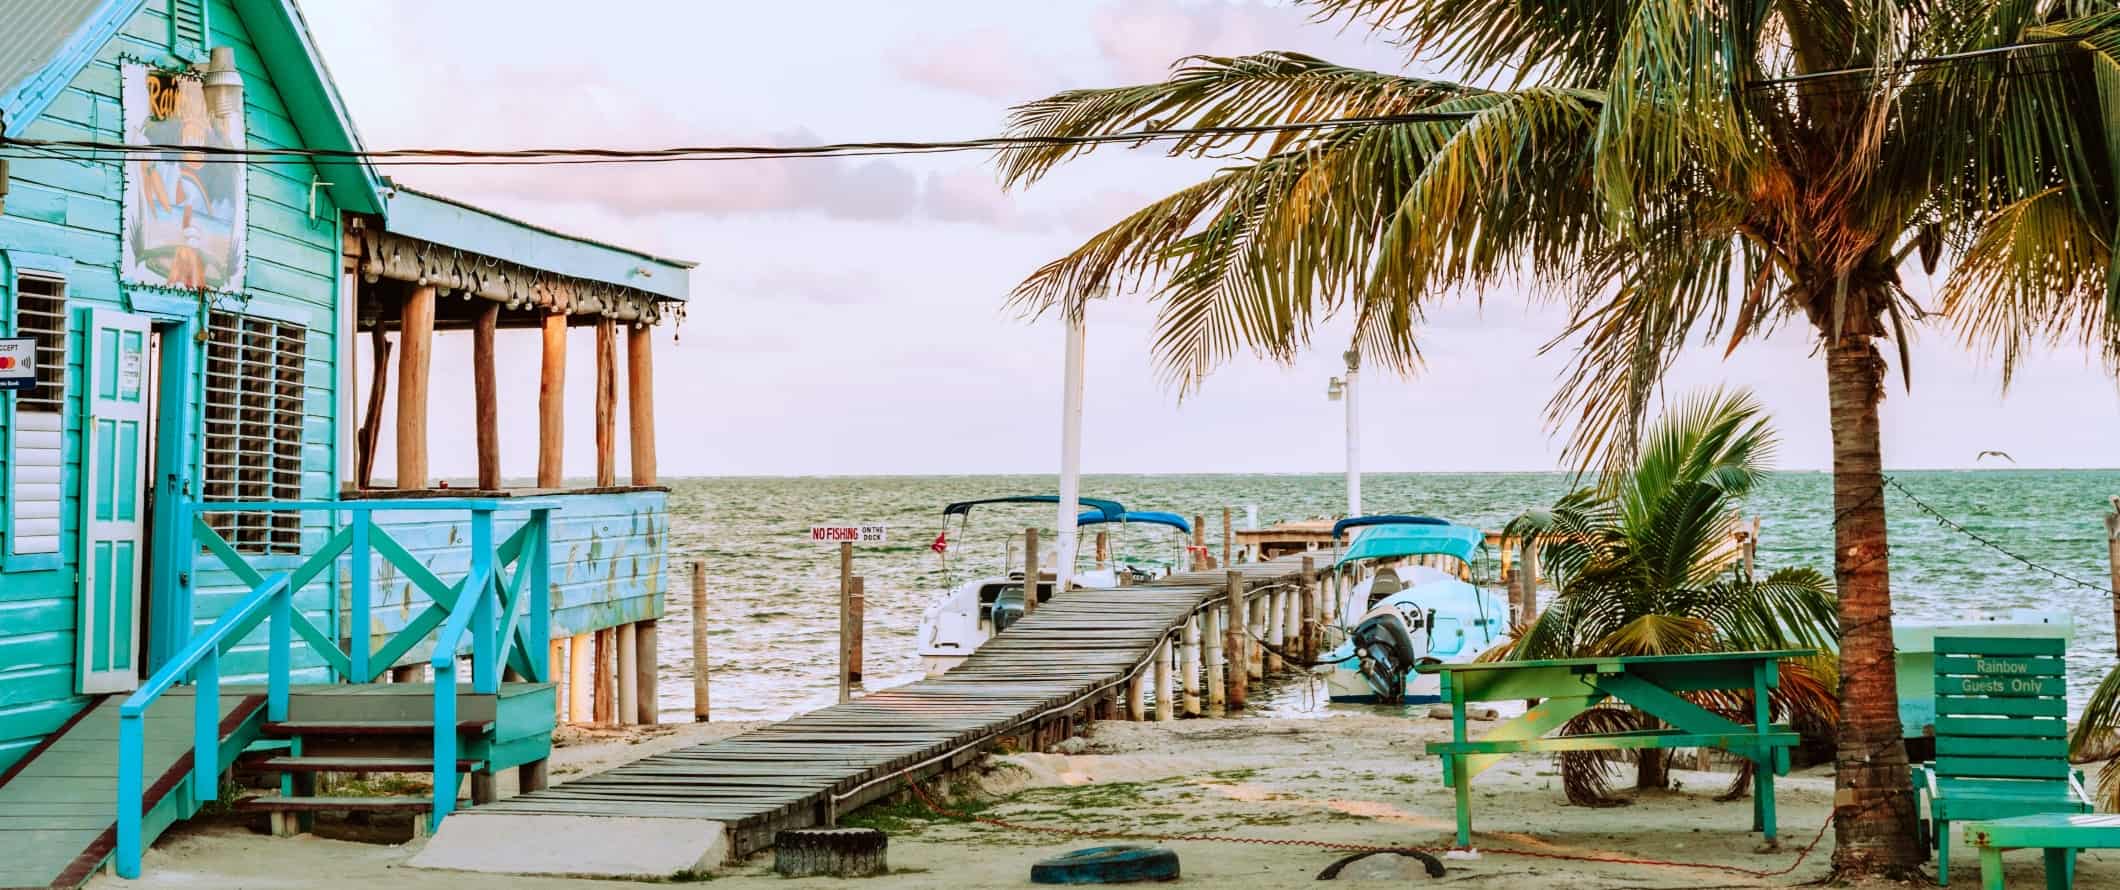 Turquoise colored house along the beach with a dock on the island of Caye Caulker in Belize